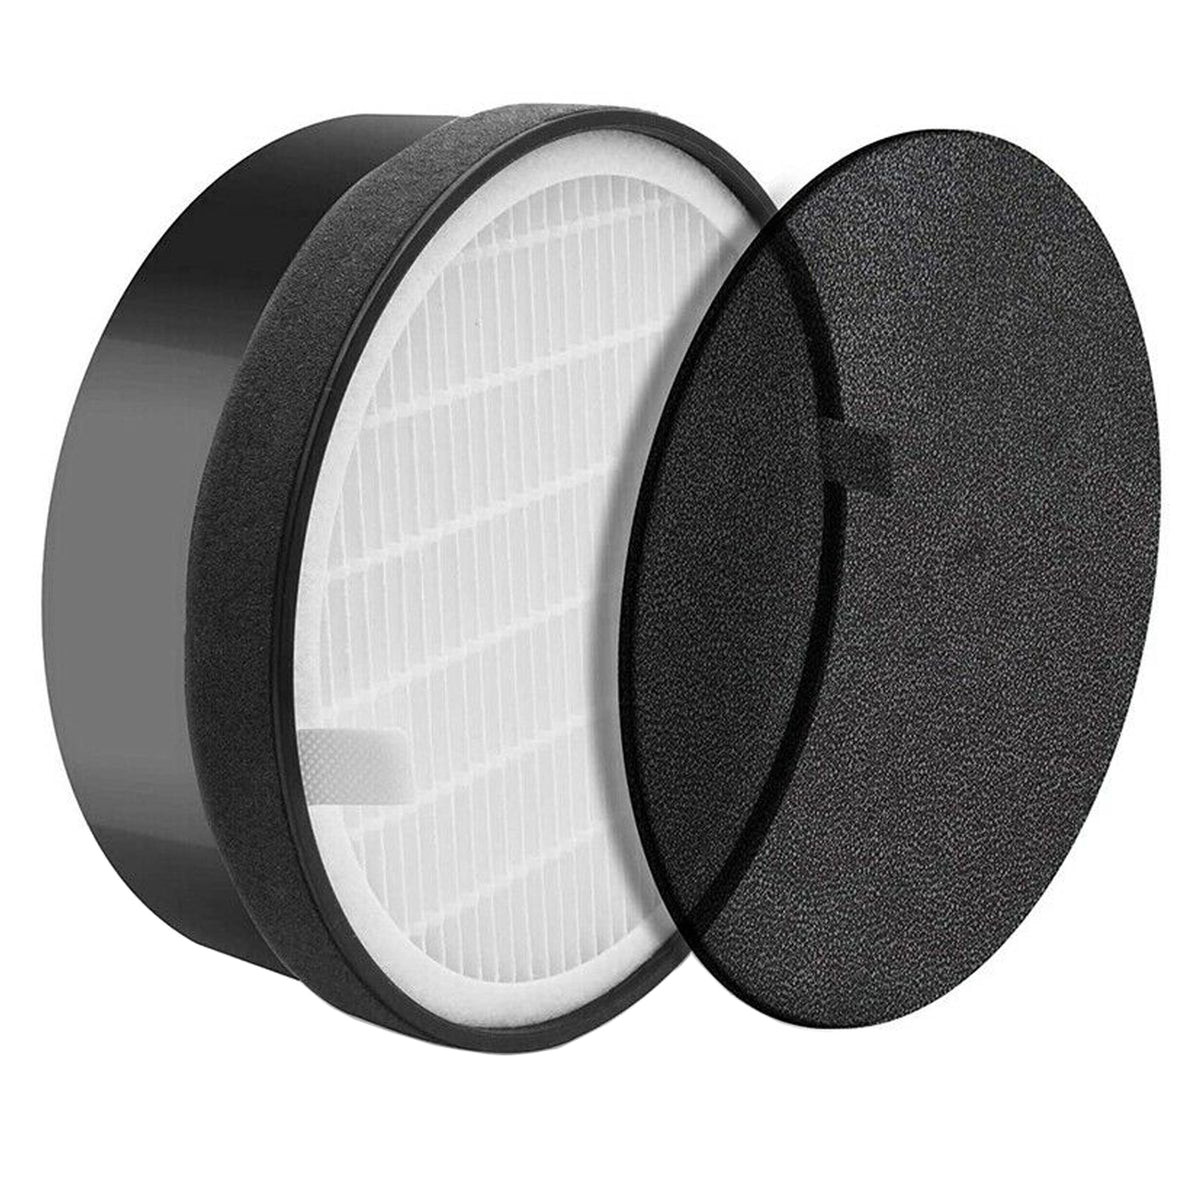 HEPA Filter Replacement Accessories For Levoit Air Purifier, Lv-H132, Lv-H132-Rf  Activated Carbon Filter